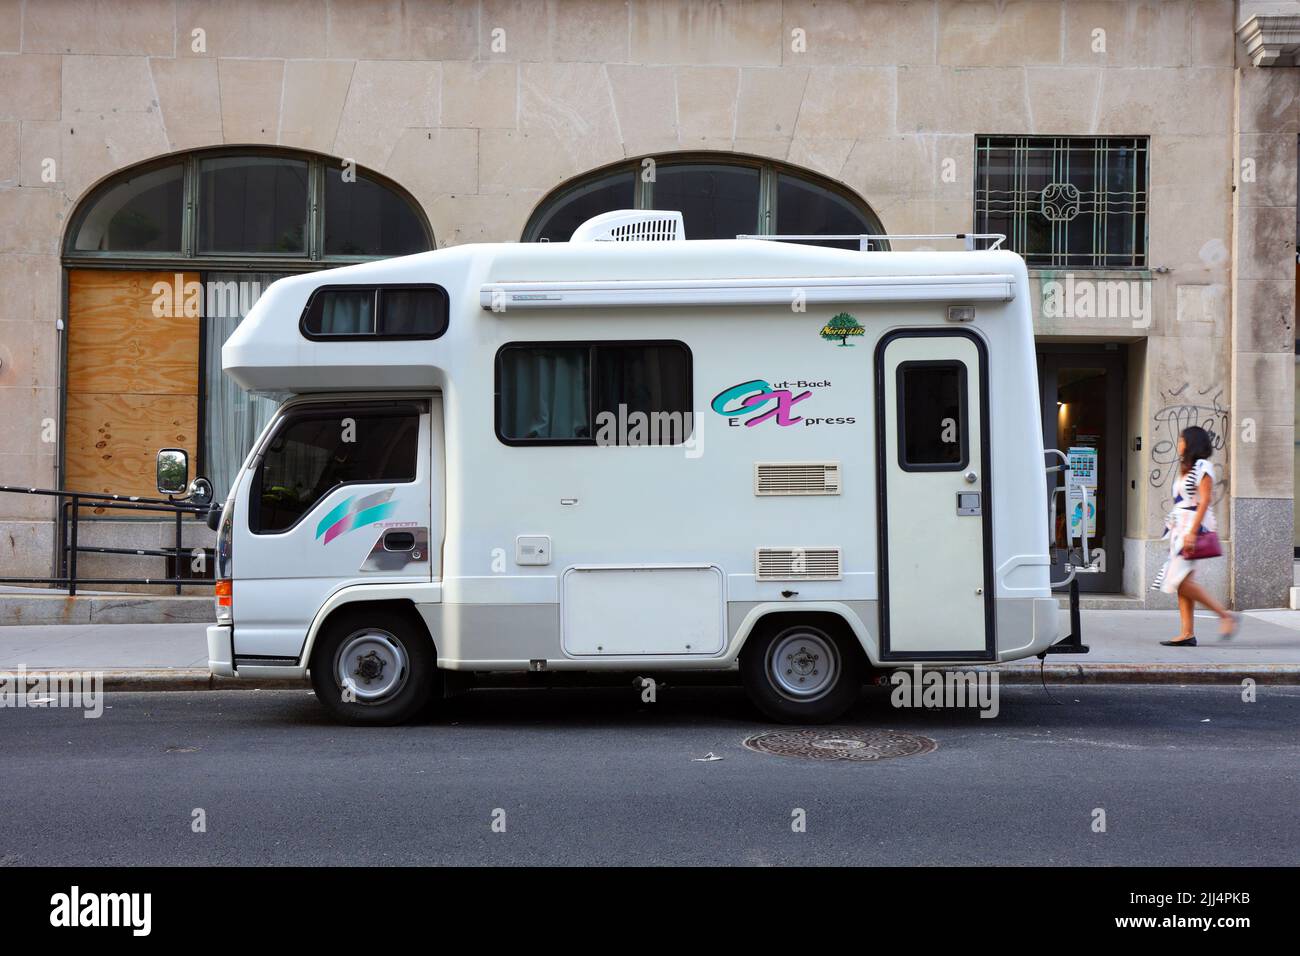 An Isuzu Elf Outback Express Japanese Camper Van and RV Motorhome parked on a street. Stock Photo